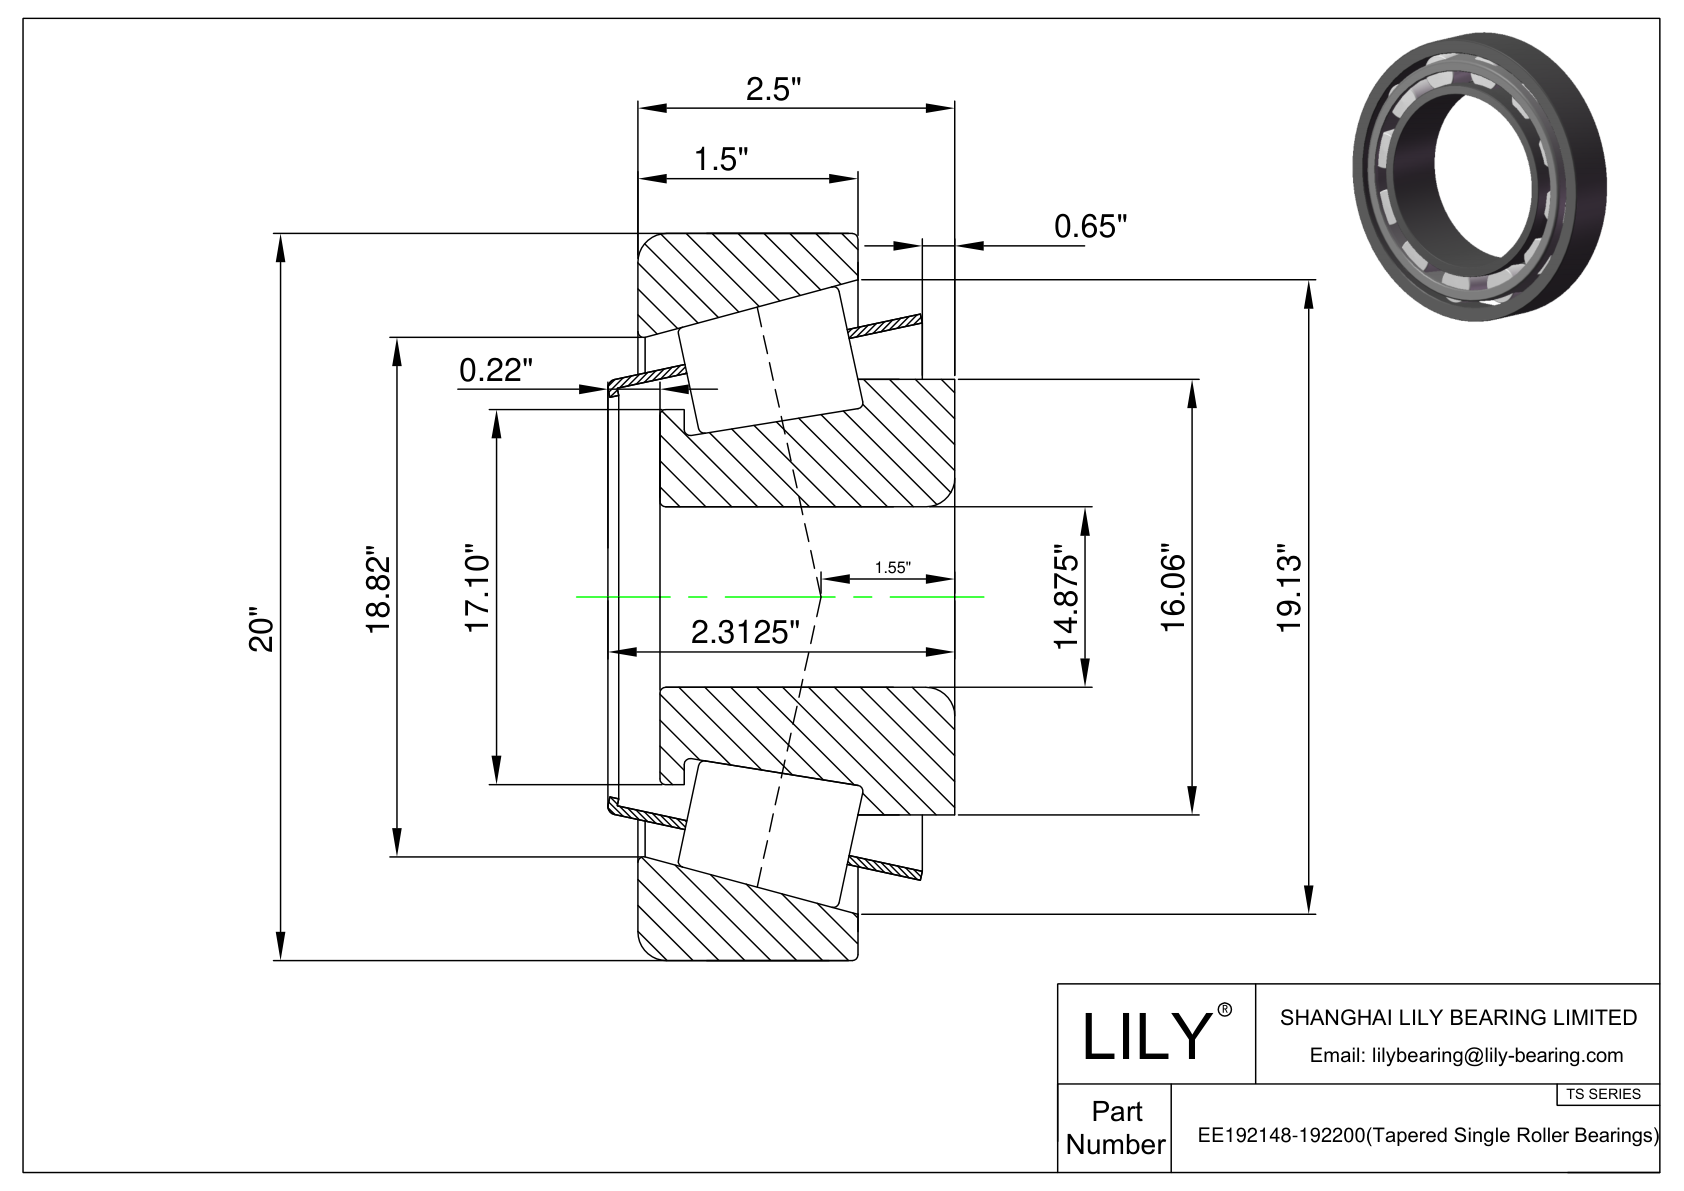 EE192148-192200 TS (Tapered Single Roller Bearings) (Imperial) cad drawing